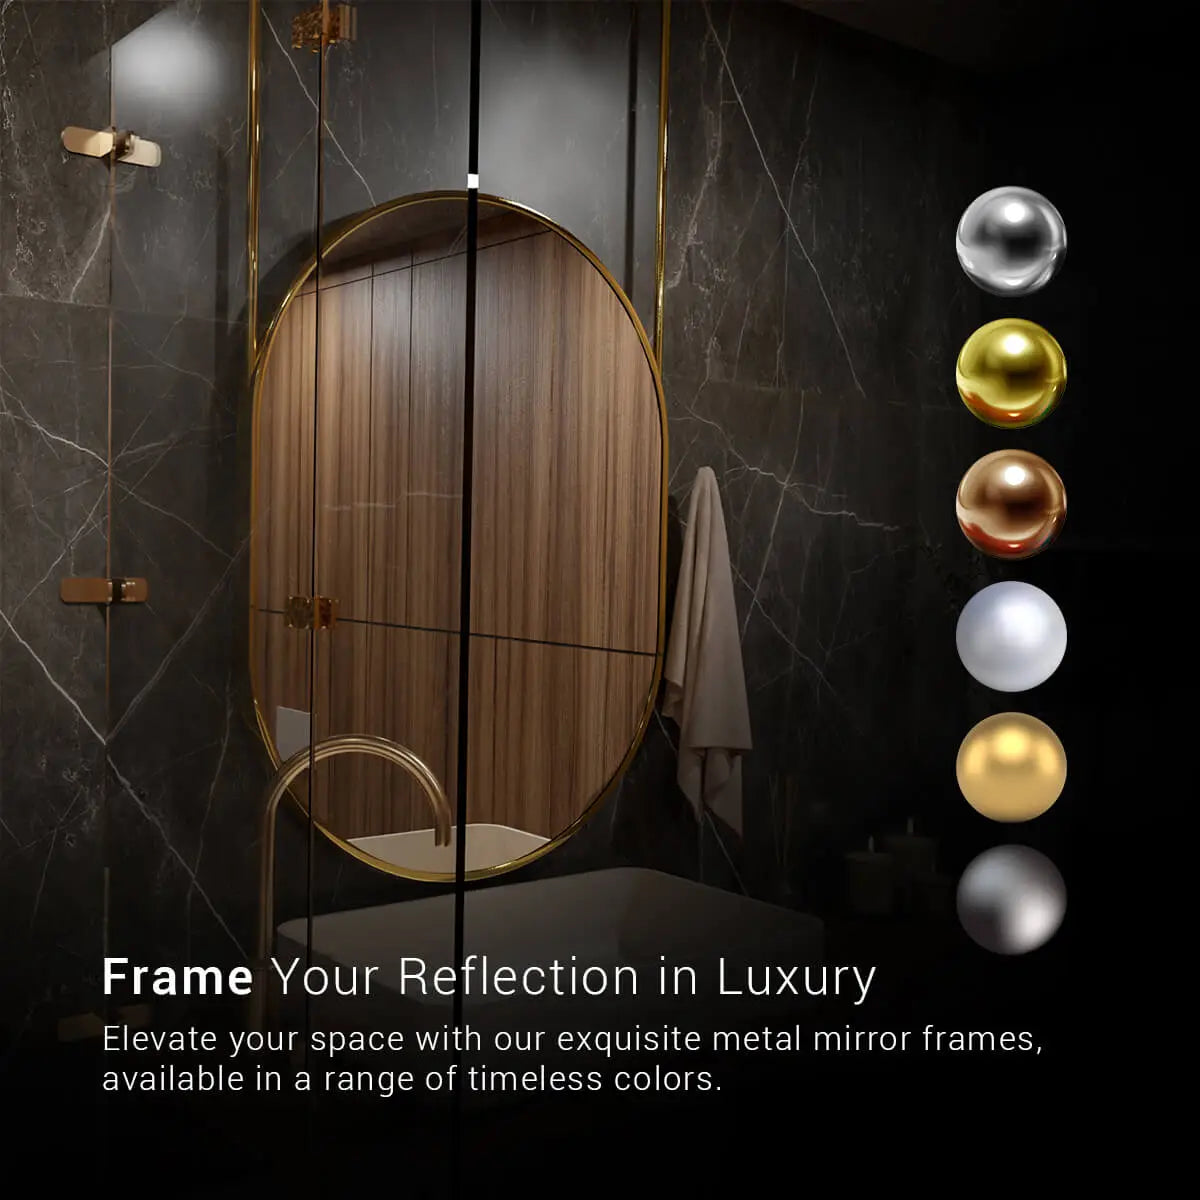 A luxury bathroom vanity set featuring a gold framed mirror and a matching gold framed medicine cabinet with a mirrored door. The mirror is mounted on the wall above a dark gray quartz countertop with a modern faucet in a brushed nickel finish. Several colors of metal are being displayed for the finish of the metal.